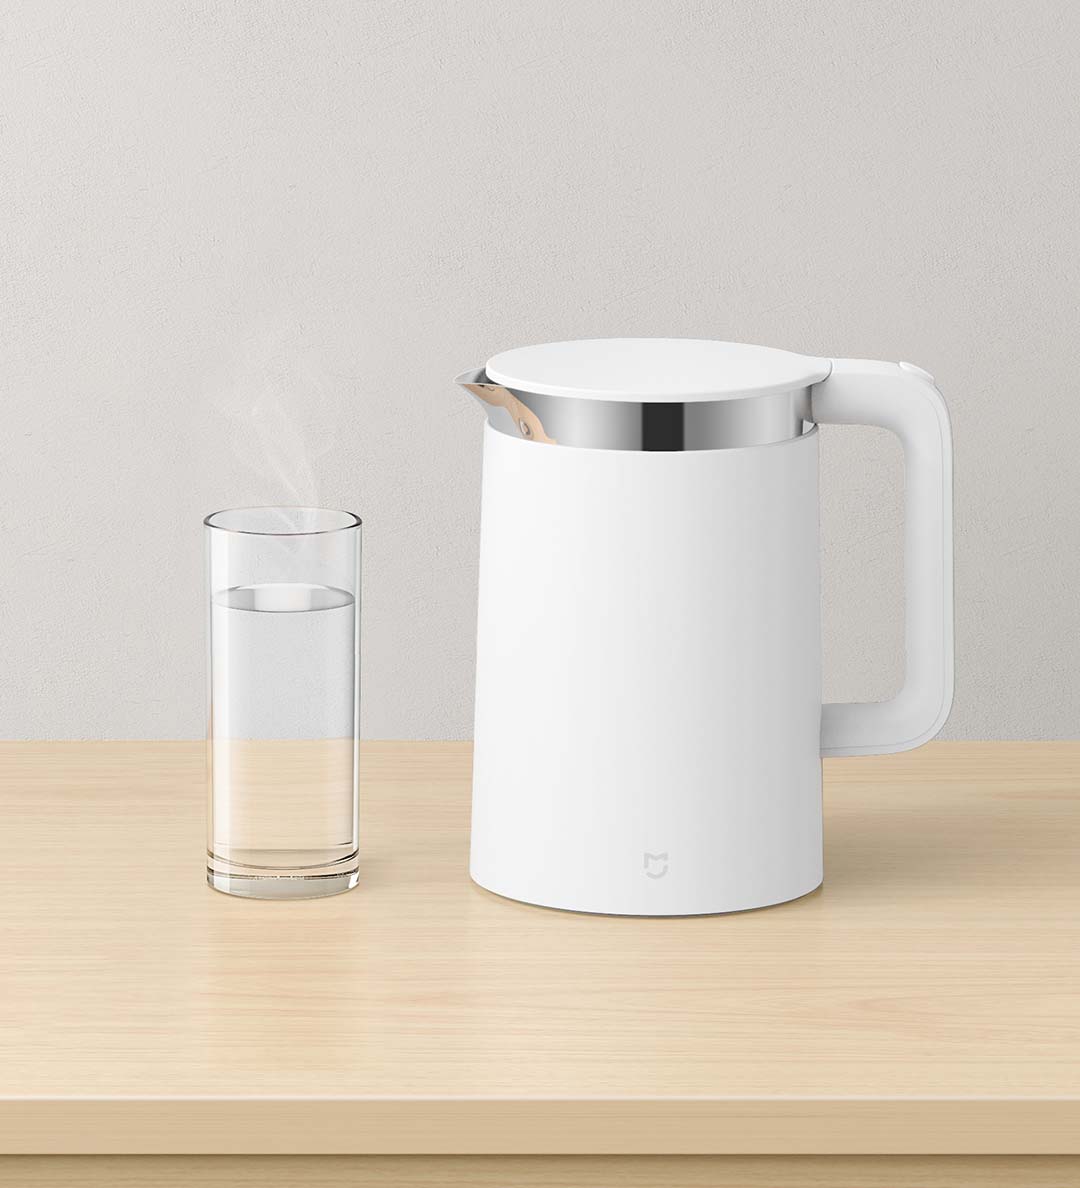 Xiaomi Mijia Thermostat Pro is a new intelligent kettle with a display